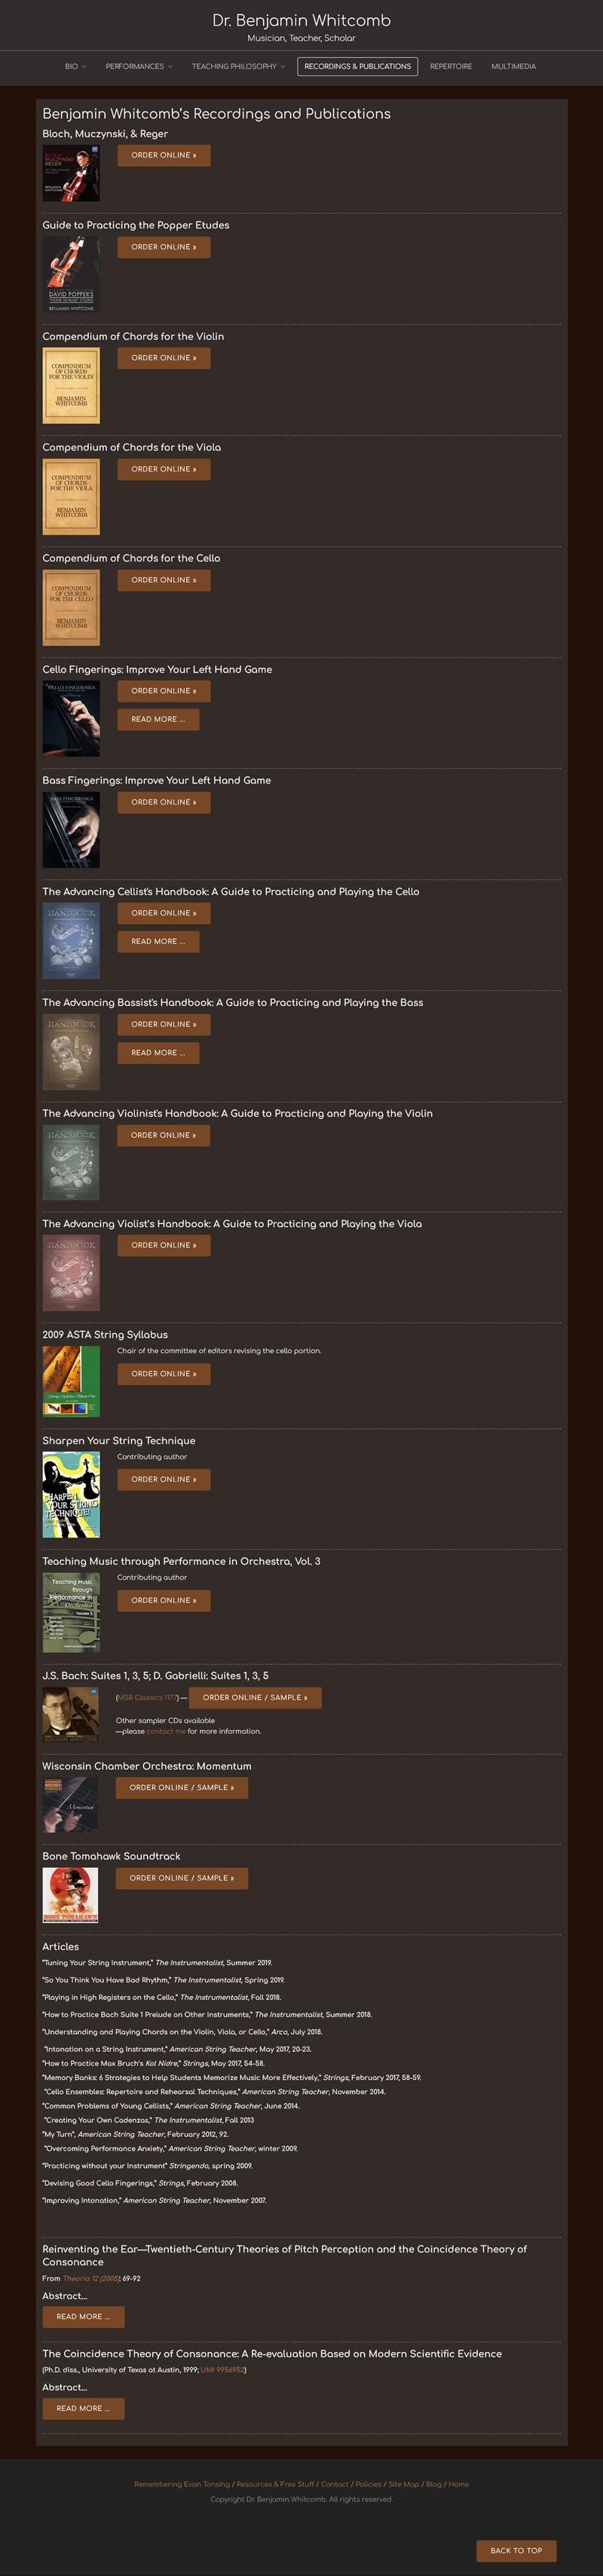 Benjamin Whitcomb website screenshot recordings and publications page